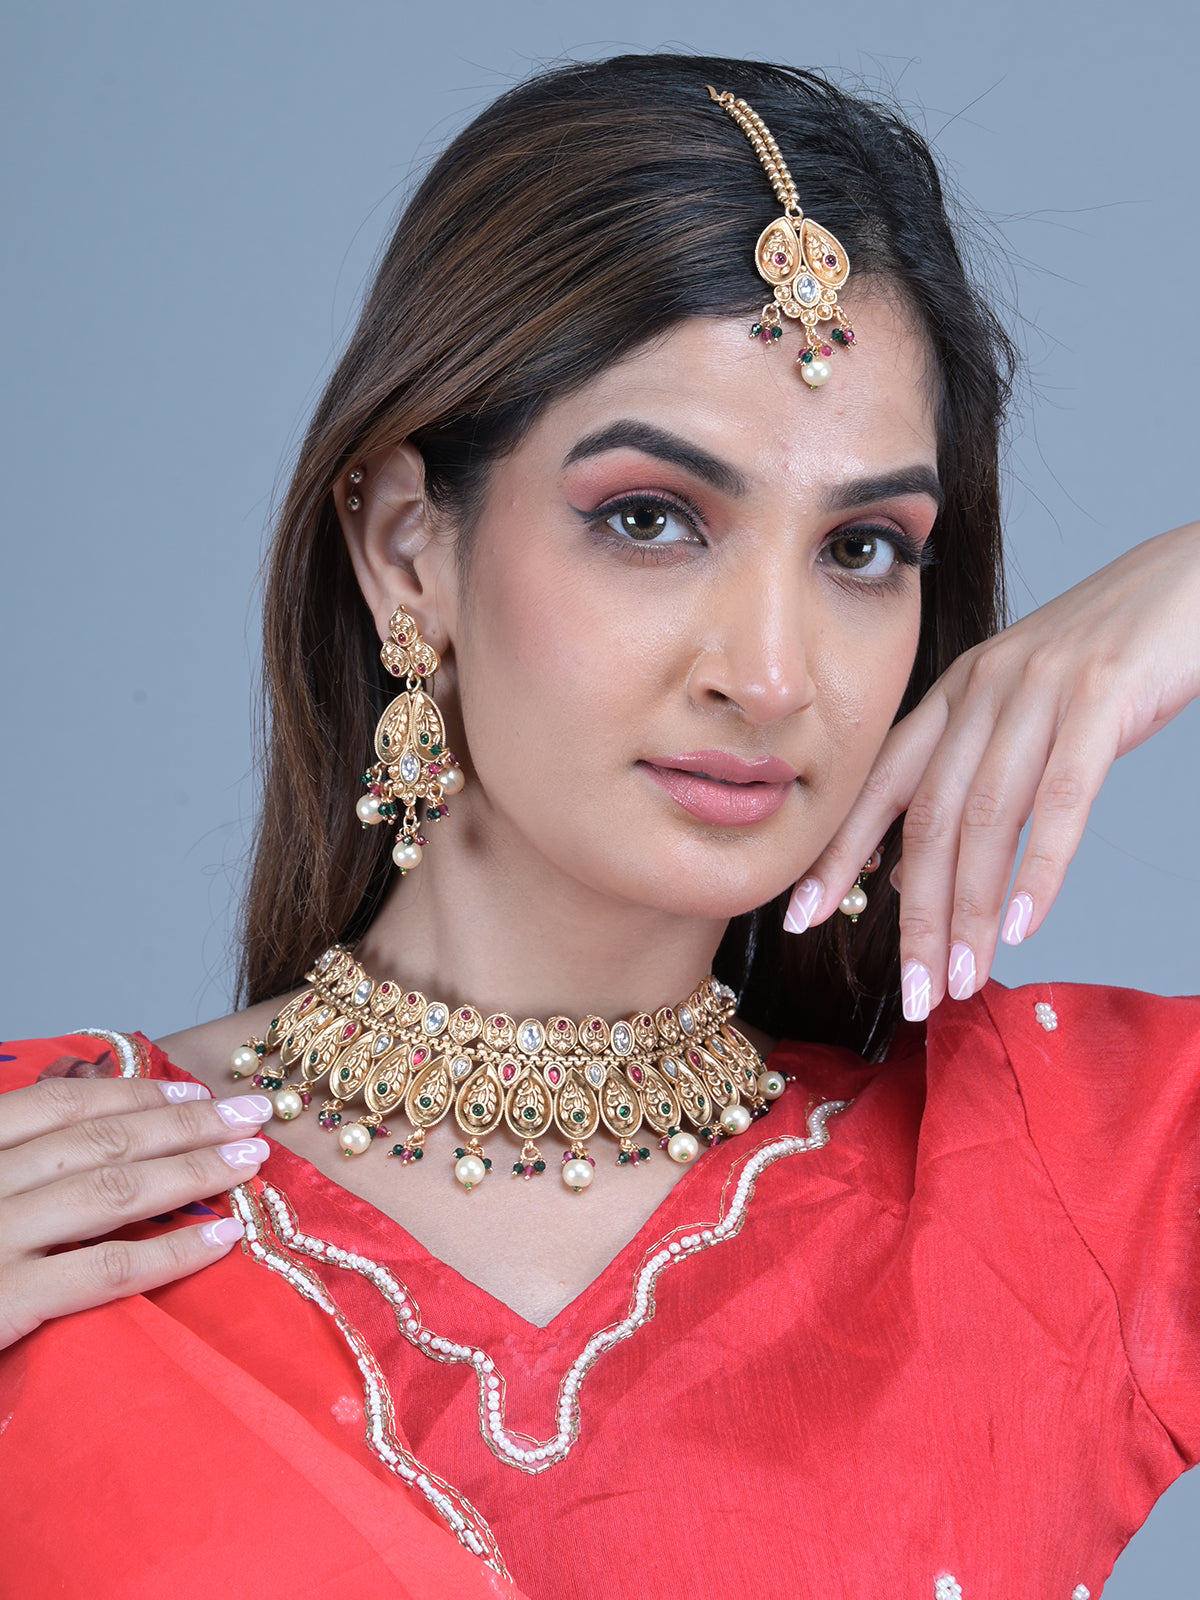 Odette Gold Faux Stone Embellished Ethnic Jewellery Set with Maangtika for Women